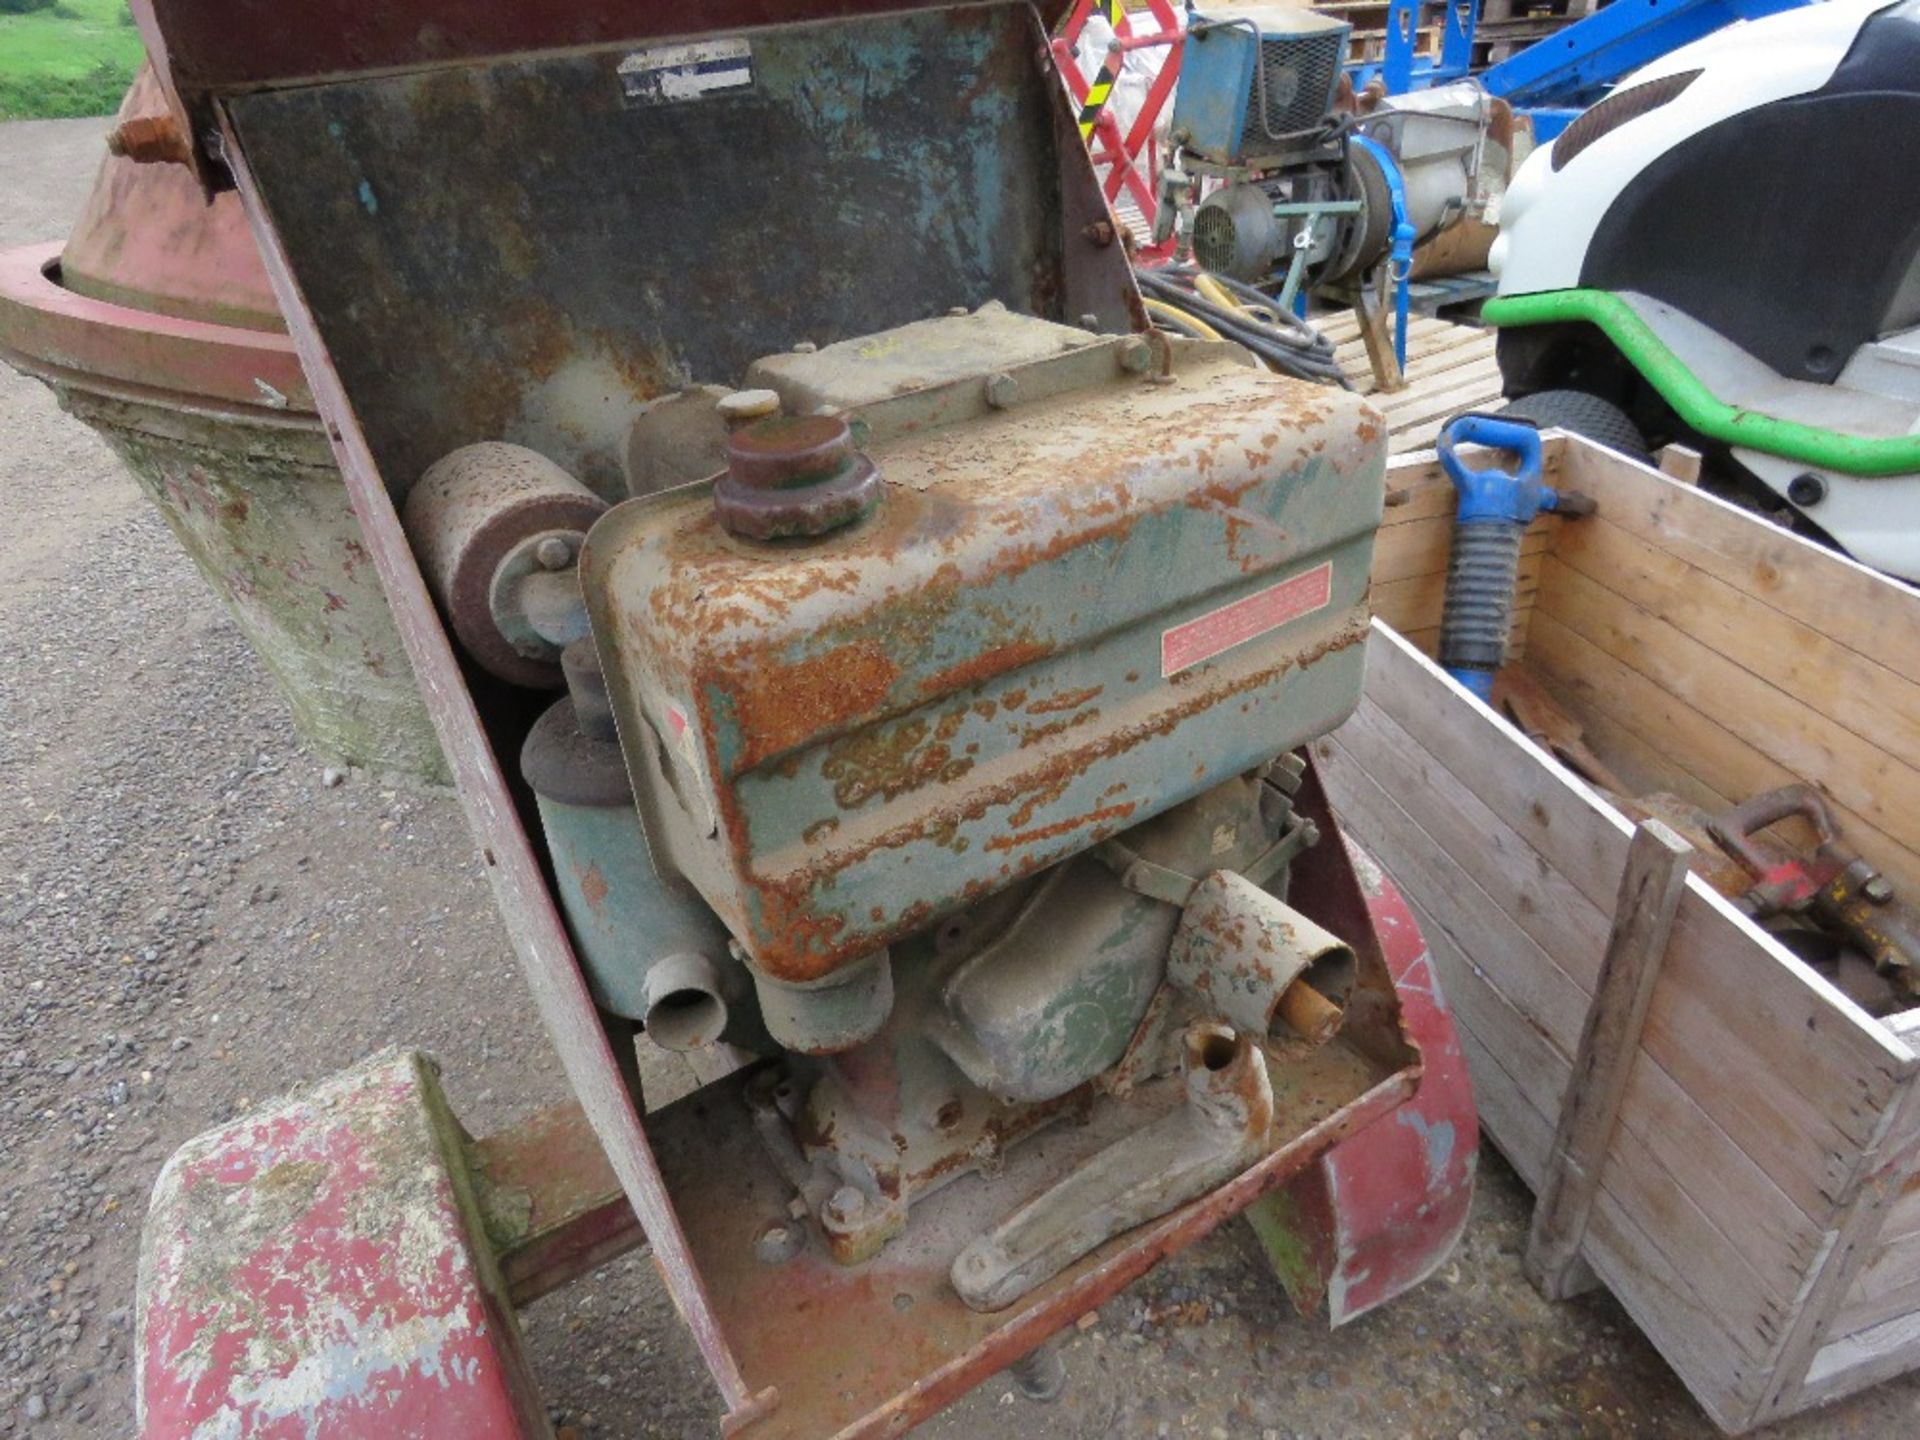 TOWED LISTER HANDLE START DIESEL ENGINED SITE MIXER. WHEN TESTED WAS SEEN TO START AND RUN AND DRUM - Image 2 of 3